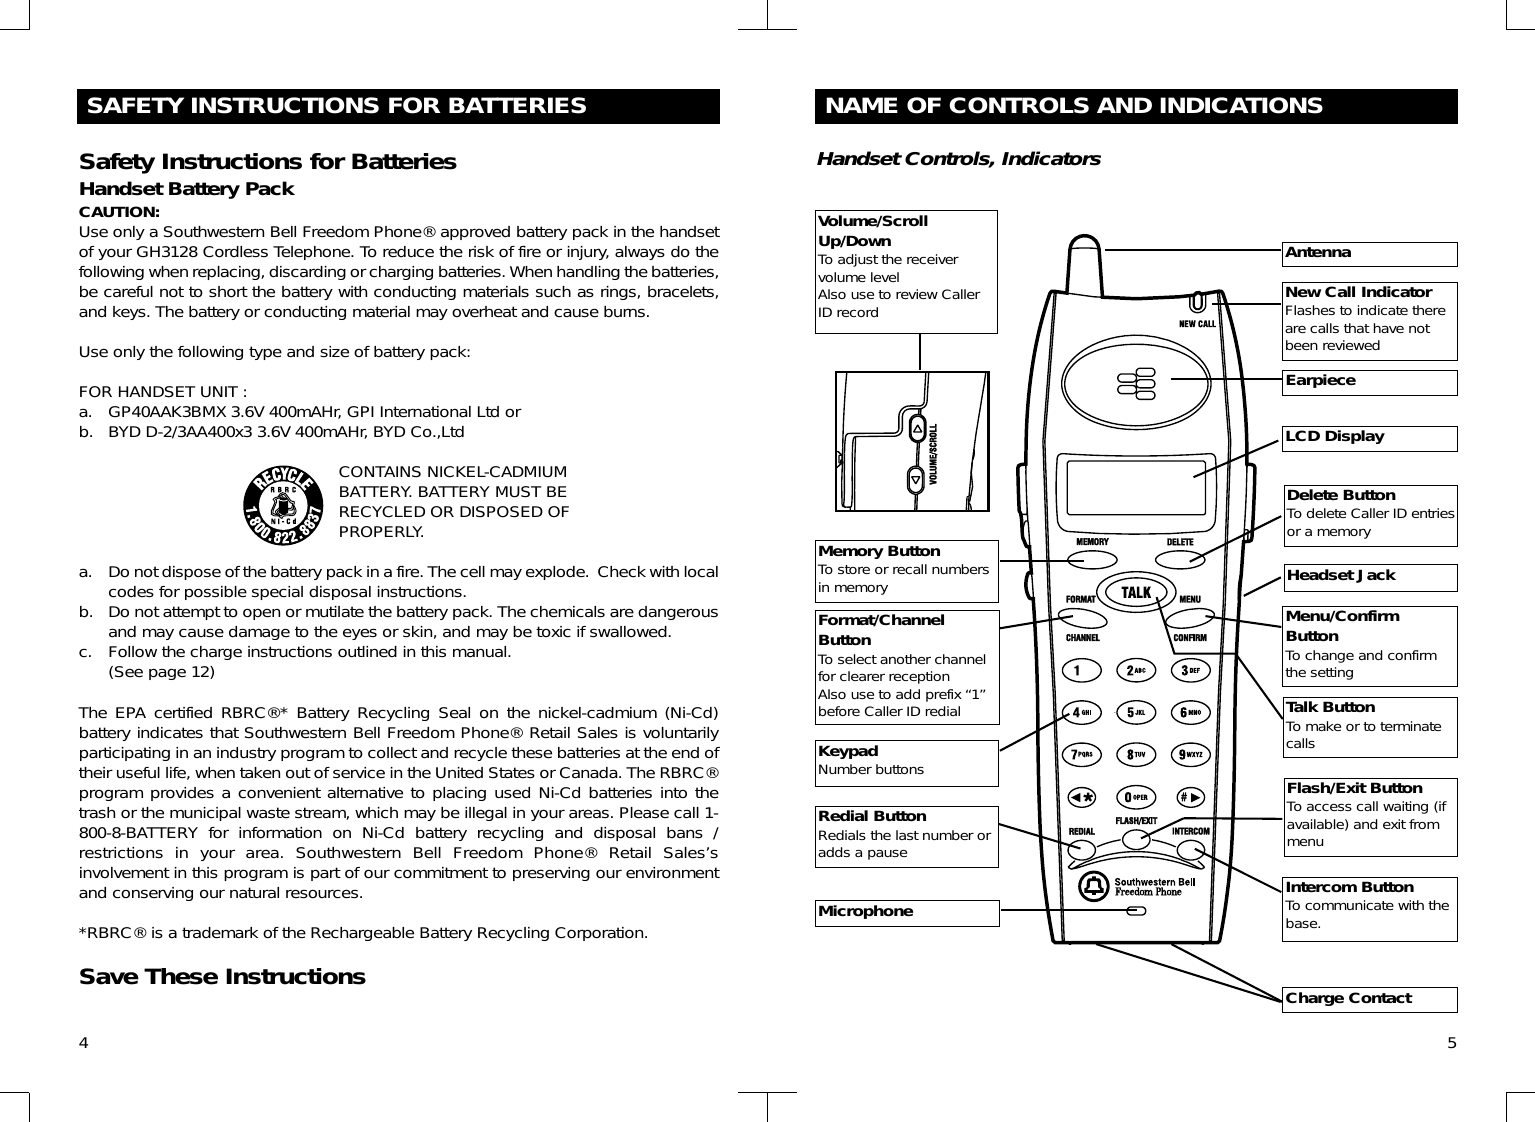 4SAFETY INSTRUCTIONS FOR BATTERIESSafety Instructions for BatteriesHandset Battery PackCAUTION:Use only a Southwestern Bell Freedom Phone® approved battery pack in the handsetof your GH3128 Cordless Telephone. To reduce the risk of fire or injury, always do thefollowing when replacing, discarding or charging batteries. When handling the batteries,be careful not to short the battery with conducting materials such as rings, bracelets,and keys. The battery or conducting material may overheat and cause burns.Use only the following type and size of battery pack:FOR HANDSET UNIT :a. GP40AAK3BMX 3.6V 400mAHr, GPI International Ltd orb. BYD D-2/3AA400x3 3.6V 400mAHr, BYD Co.,Ltda. Do not dispose of the battery pack in a fire. The cell may explode.  Check with localcodes for possible special disposal instructions.b. Do not attempt to open or mutilate the battery pack. The chemicals are dangerousand may cause damage to the eyes or skin, and may be toxic if swallowed.c. Follow the charge instructions outlined in this manual.(See page 12)The EPA certified RBRC®* Battery Recycling Seal on the nickel-cadmium (Ni-Cd)battery indicates that Southwestern Bell Freedom Phone® Retail Sales is voluntarilyparticipating in an industry program to collect and recycle these batteries at the end oftheir useful life, when taken out of service in the United States or Canada. The RBRC®program provides a convenient alternative to placing used Ni-Cd batteries into thetrash or the municipal waste stream, which may be illegal in your areas. Please call 1-800-8-BATTERY for information on Ni-Cd battery recycling and disposal bans /restrictions in your area. Southwestern Bell Freedom Phone® Retail Sales’sinvolvement in this program is part of our commitment to preserving our environmentand conserving our natural resources.*RBRC® is a trademark of the Rechargeable Battery Recycling Corporation.Save These InstructionsCONTAINS NICKEL-CADMIUMBATTERY. BATTERY MUST BERECYCLED OR DISPOSED OFPROPERLY.5NAME OF CONTROLS AND INDICATIONSHandset Controls, IndicatorsAntennaEarpieceLCD DisplayNew Call IndicatorFlashes to indicate thereare calls that have notbeen reviewedMemory ButtonTo store or recall numbersin memoryDelete ButtonTo delete Caller ID entriesor a memoryRedial ButtonRedials the last number oradds a pauseFlash/Exit ButtonTo access call waiting (ifavailable) and exit frommenuMicrophoneVolume/ScrollUp/DownTo adjust the receivervolume levelAlso use to review CallerID recordTalk ButtonTo make or to terminatecallsKeypadNumber buttonsFormat/ChannelButtonTo select another channelfor clearer receptionAlso use to add prefix “1”before Caller ID redialIntercom ButtonTo communicate with thebase.Headset JackCharge ContactMenu/ConfirmButtonTo change and confirmthe setting